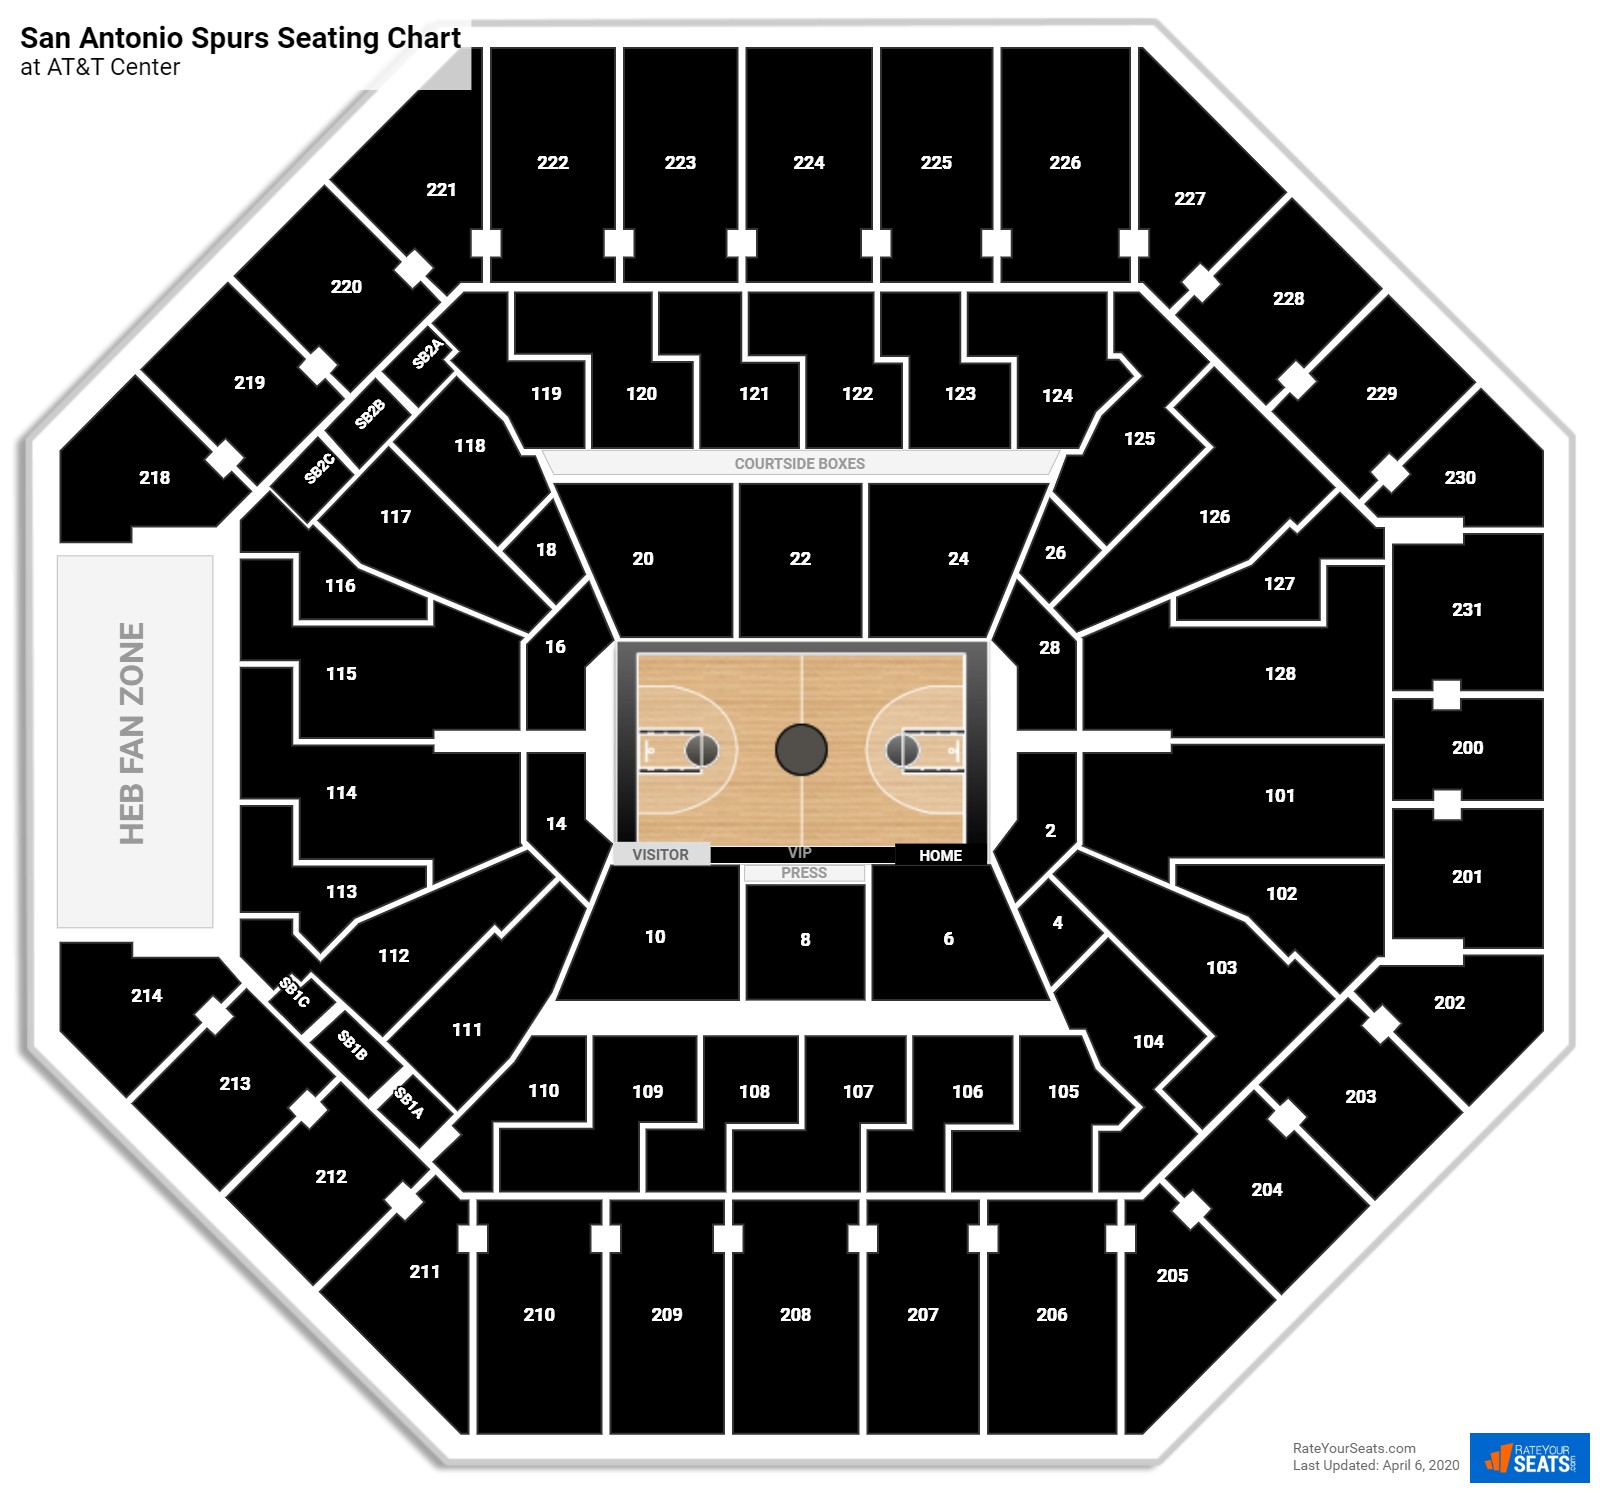 Spurs Seating Chart